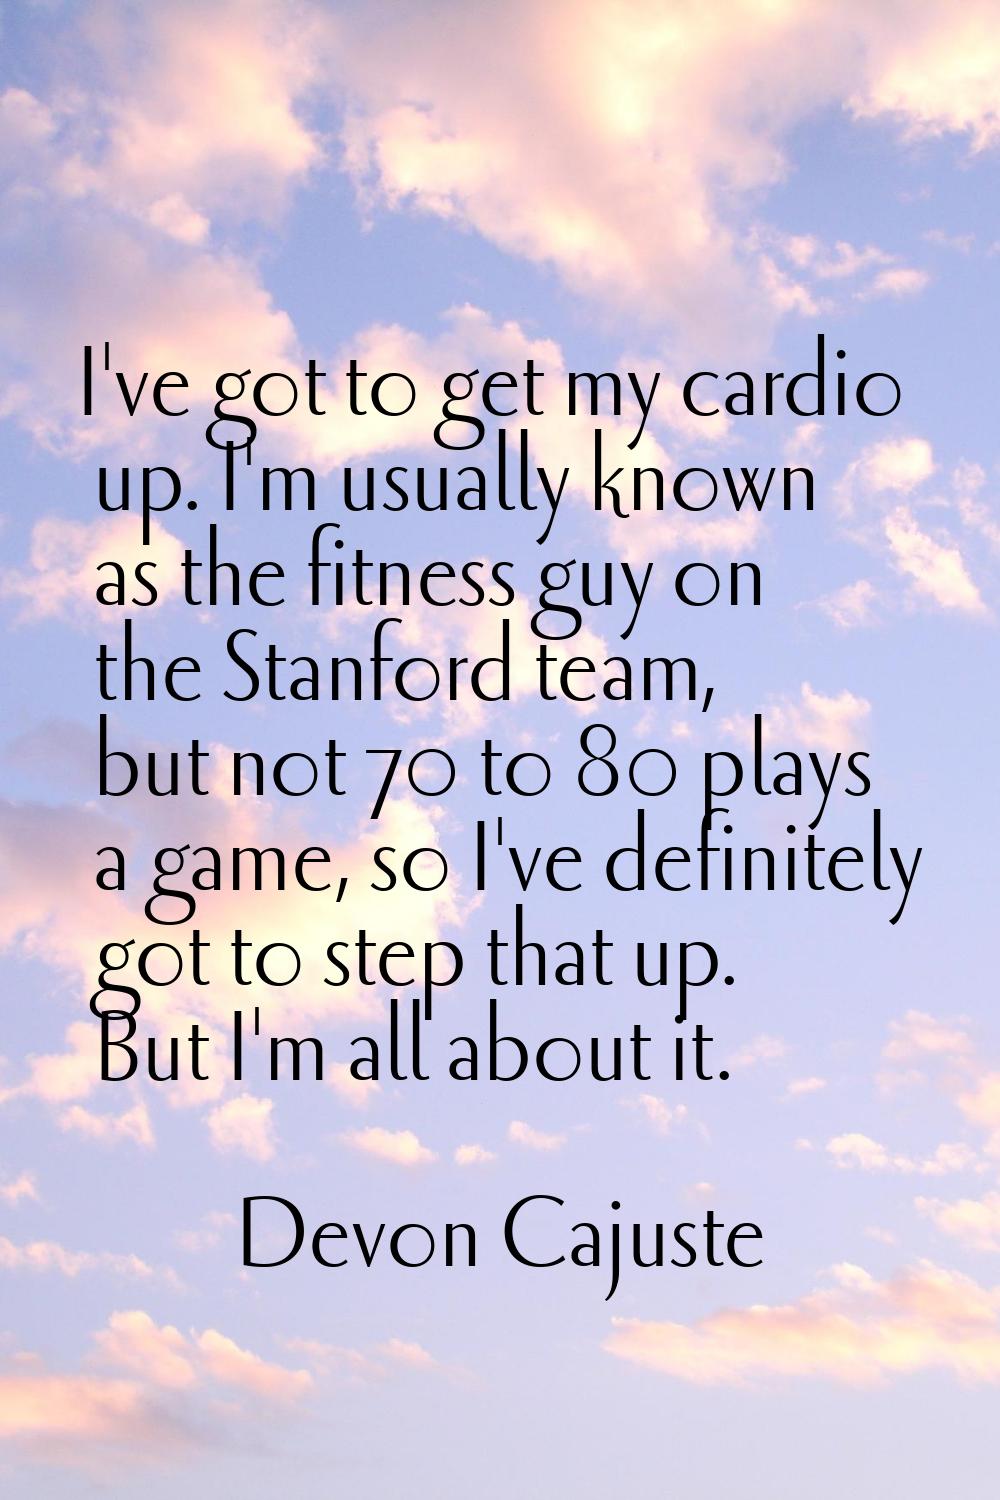 I've got to get my cardio up. I'm usually known as the fitness guy on the Stanford team, but not 70